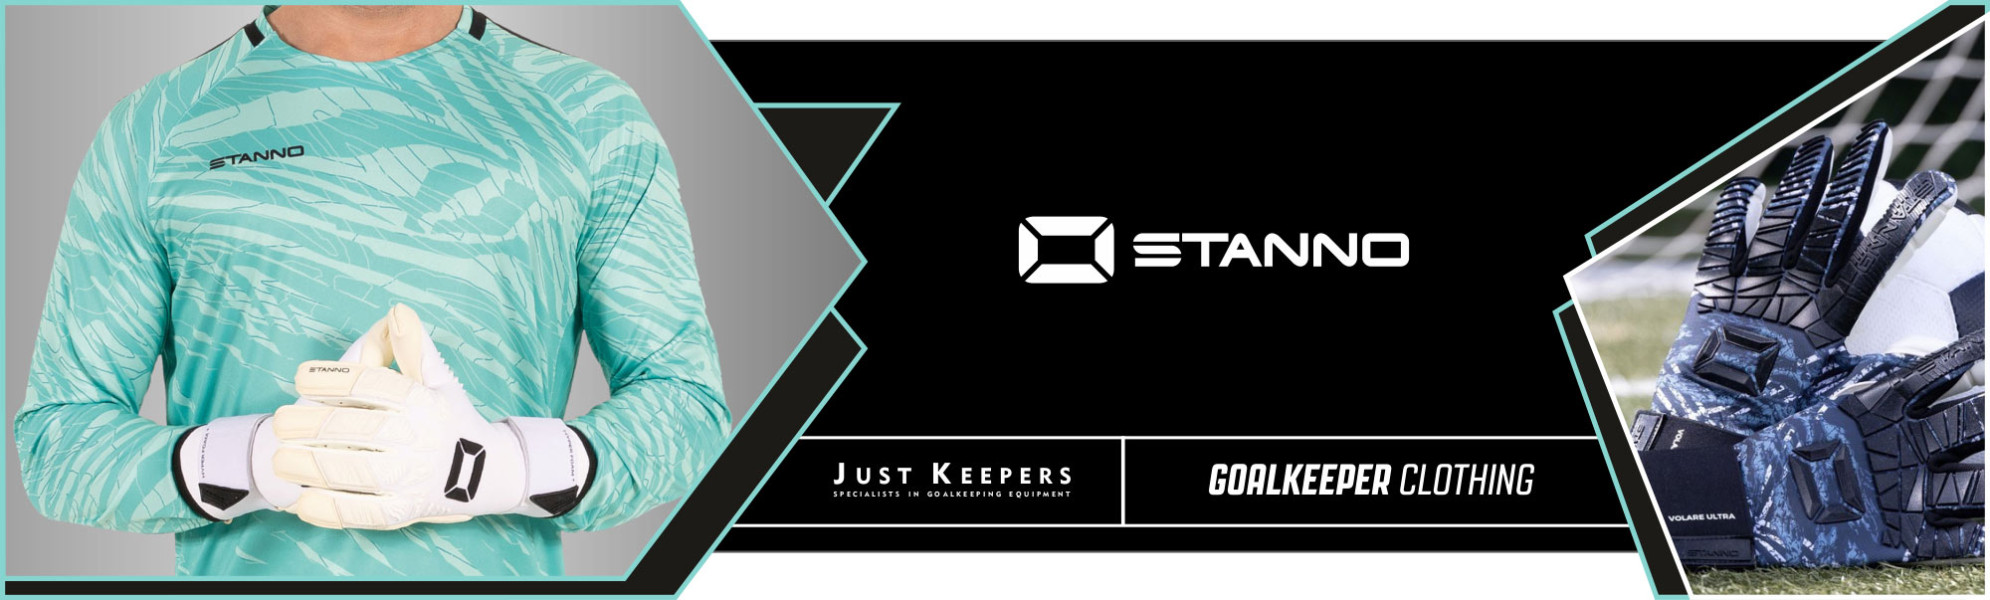 Stanno Goalkeeper Kits & padded baselayer just keepers